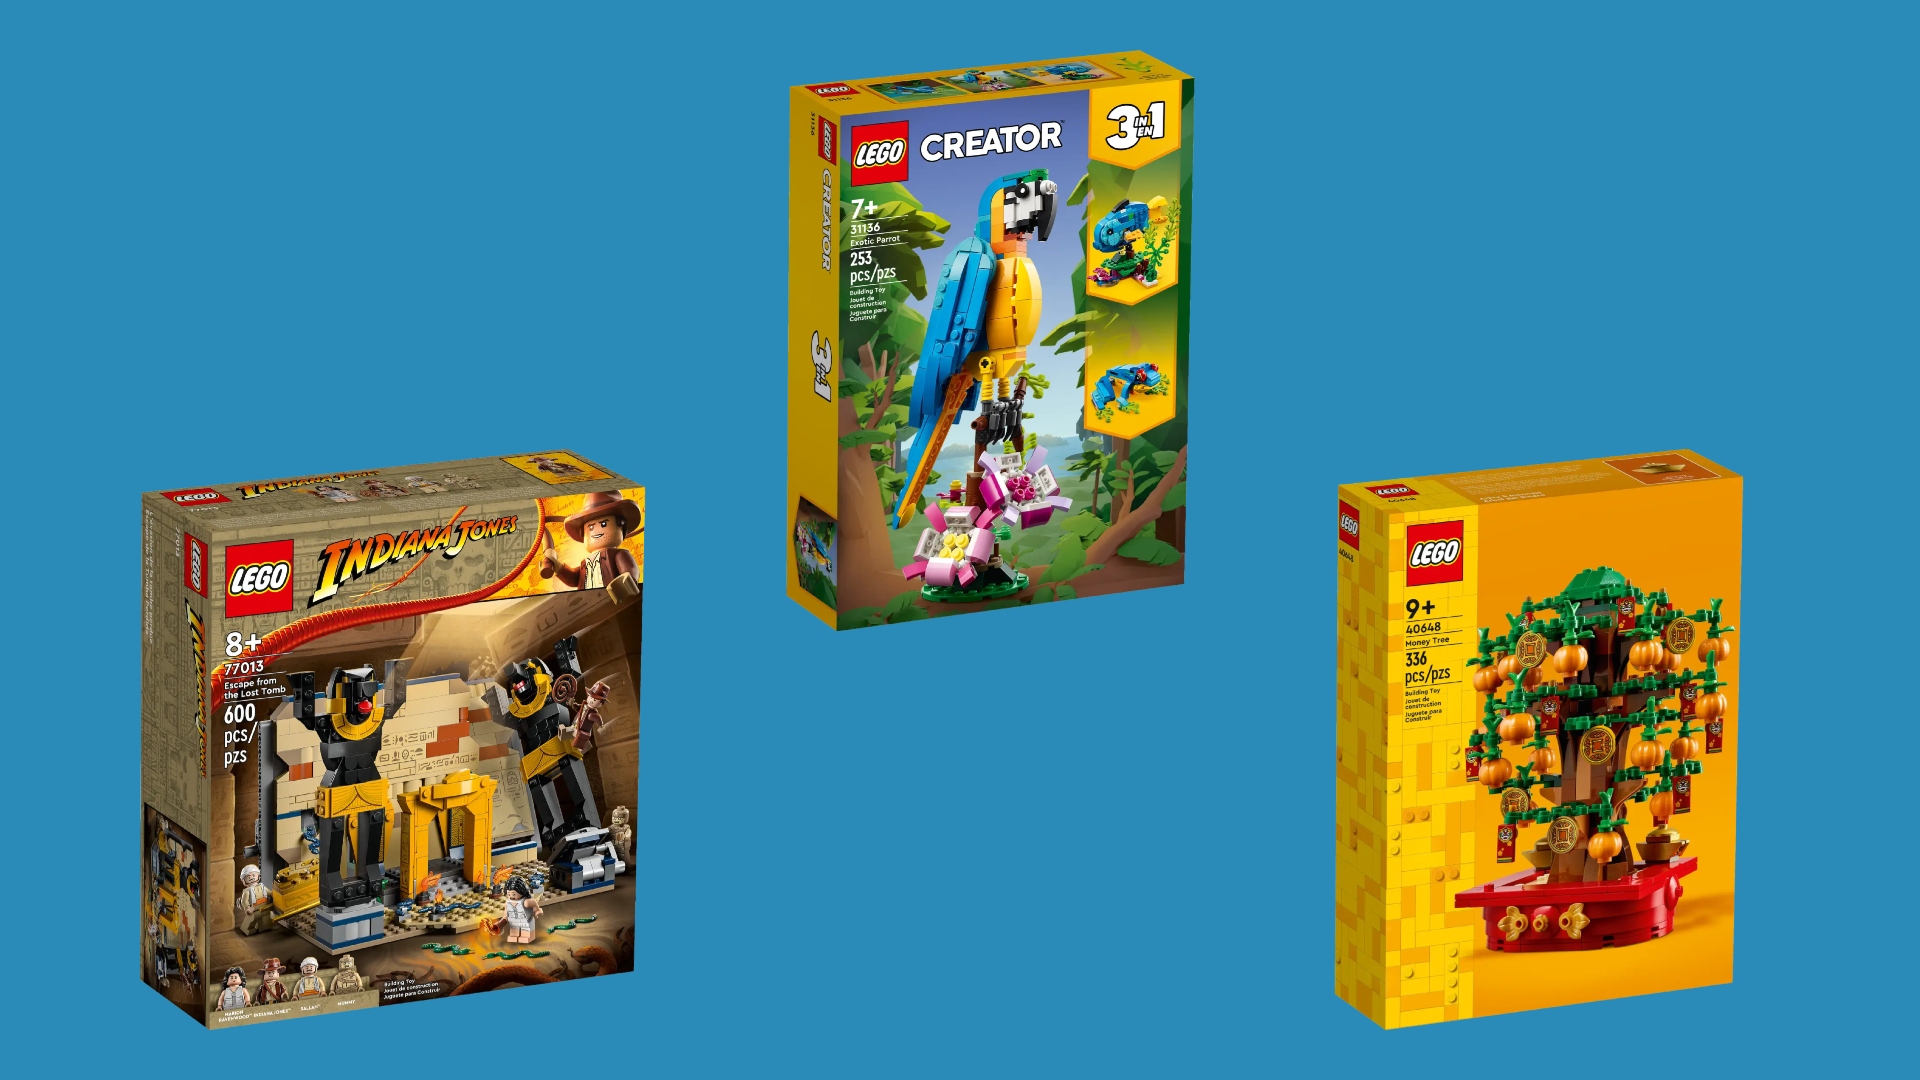 Better look at the March 2023! LEGO Creator 3-in-1 sets. Brick